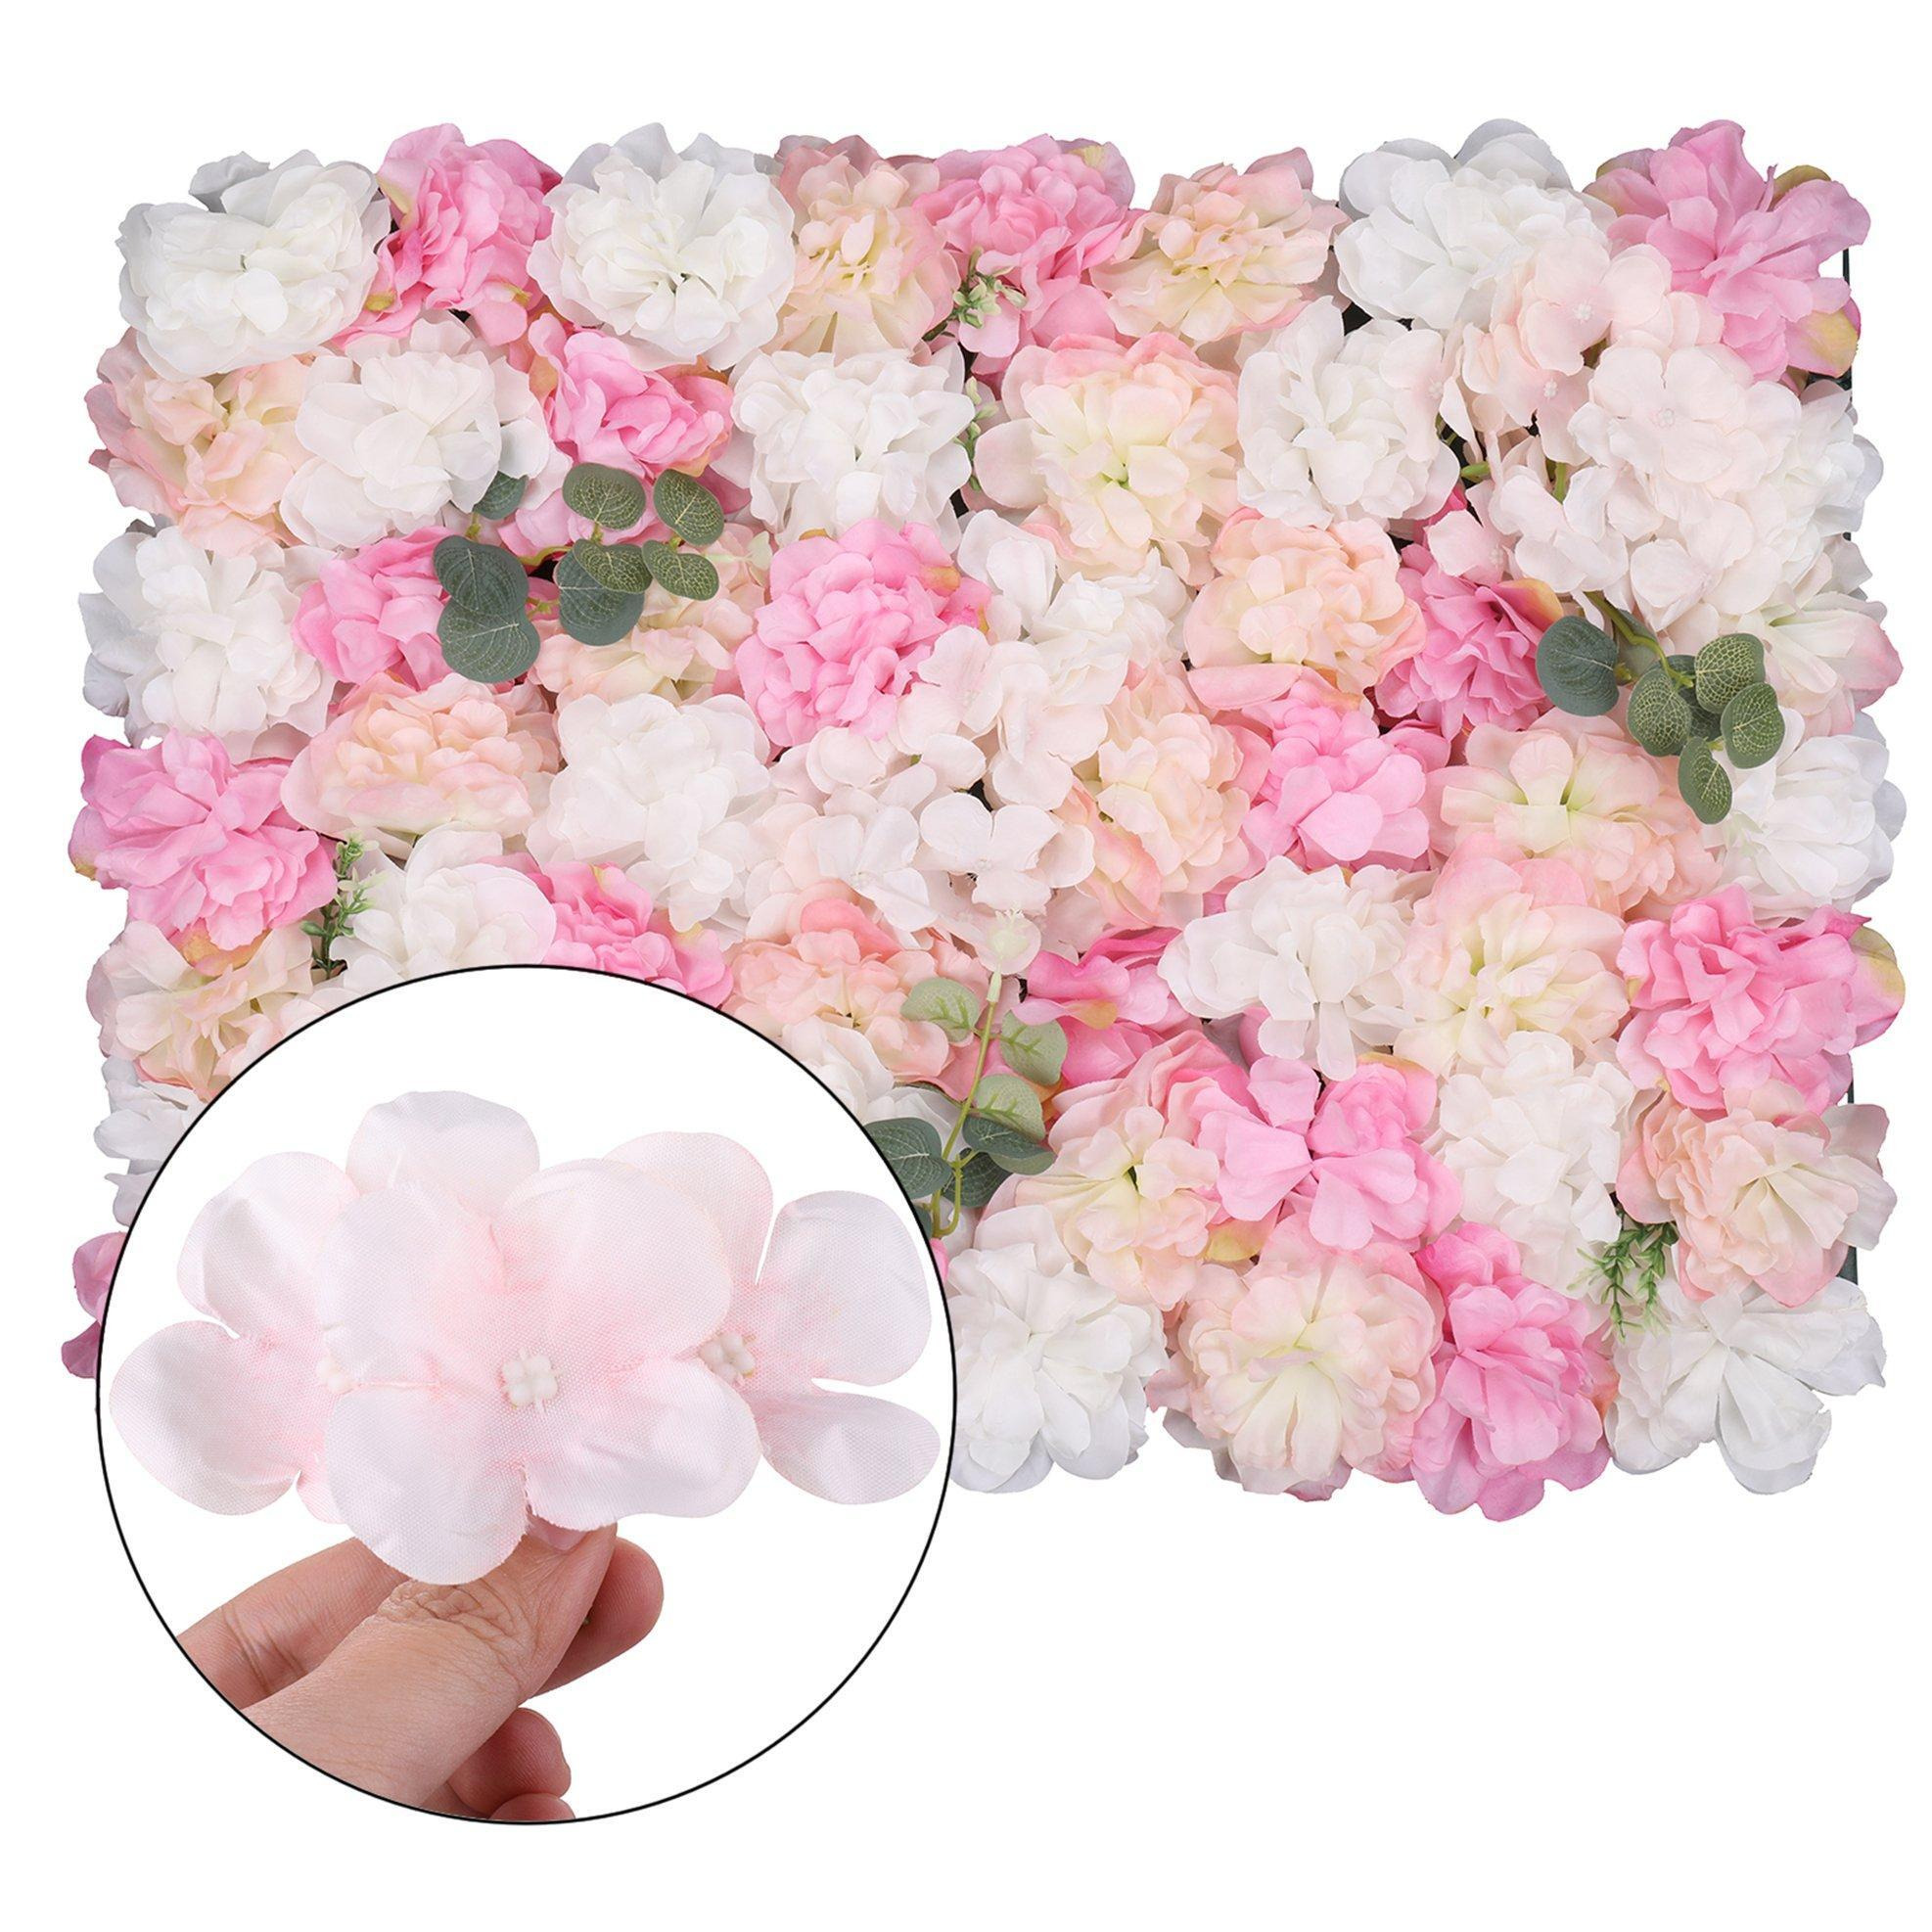 Decorative Artificial Flower Wall Panel Wedding Photo Background - image 1